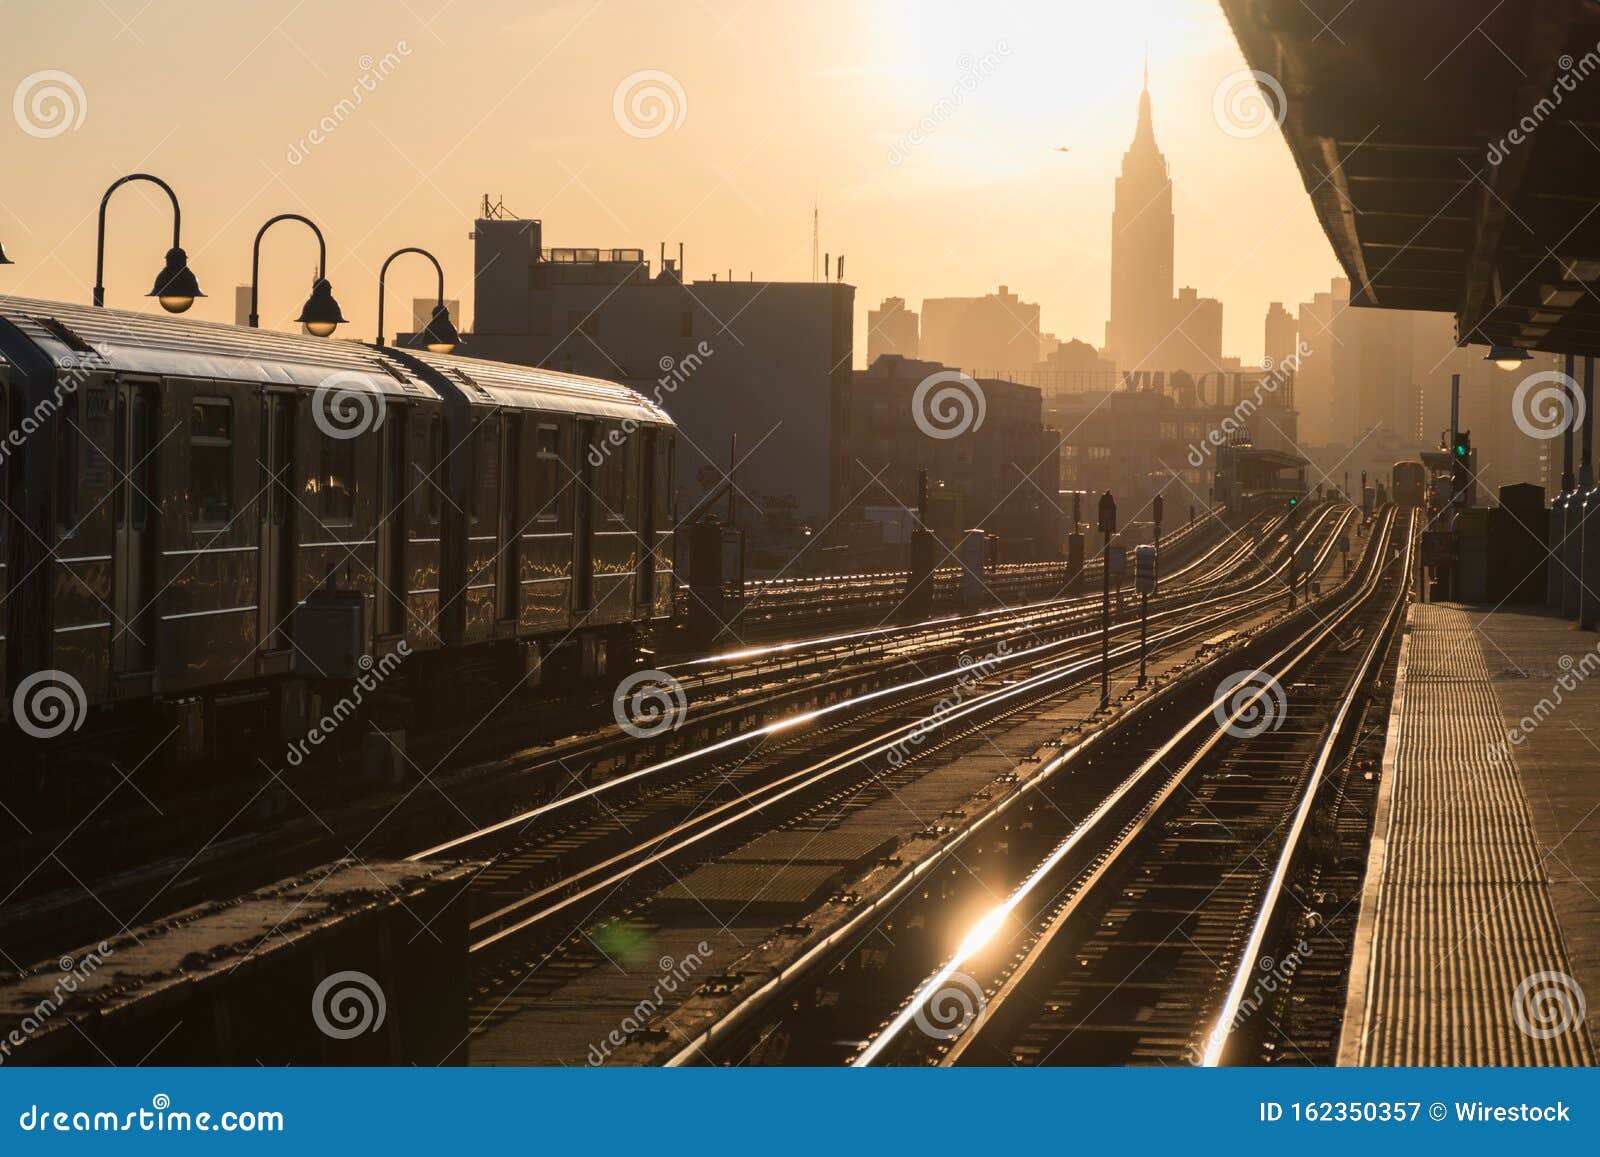 railway station platform with trains coming and leaving and a city silhouette in the background